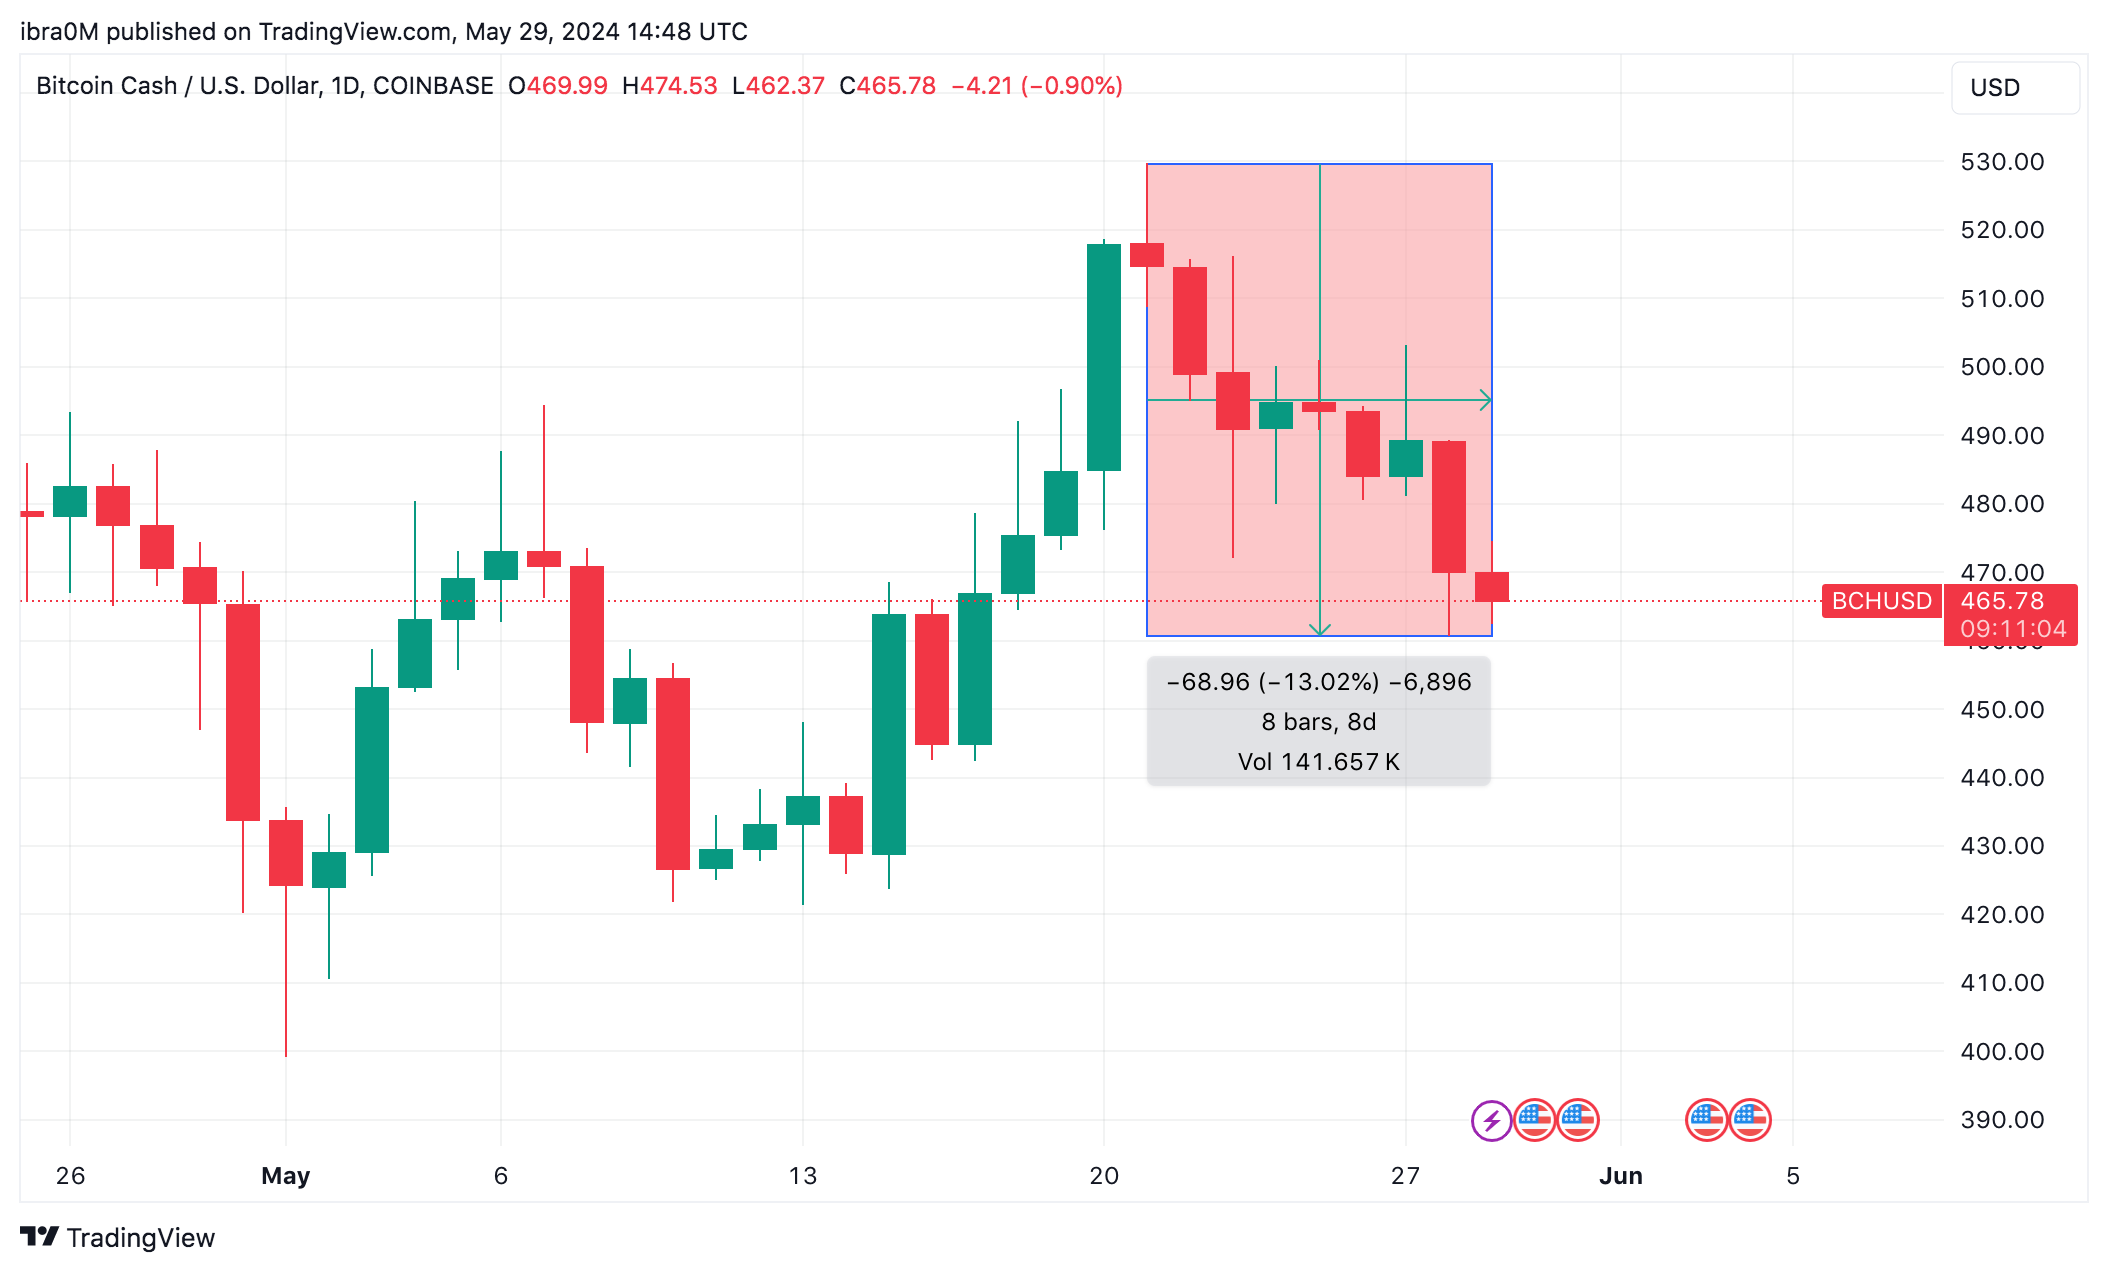 Bitcoin Cash Price Action (BCH/USD) May 21 - May 29, 2024 | TradingView